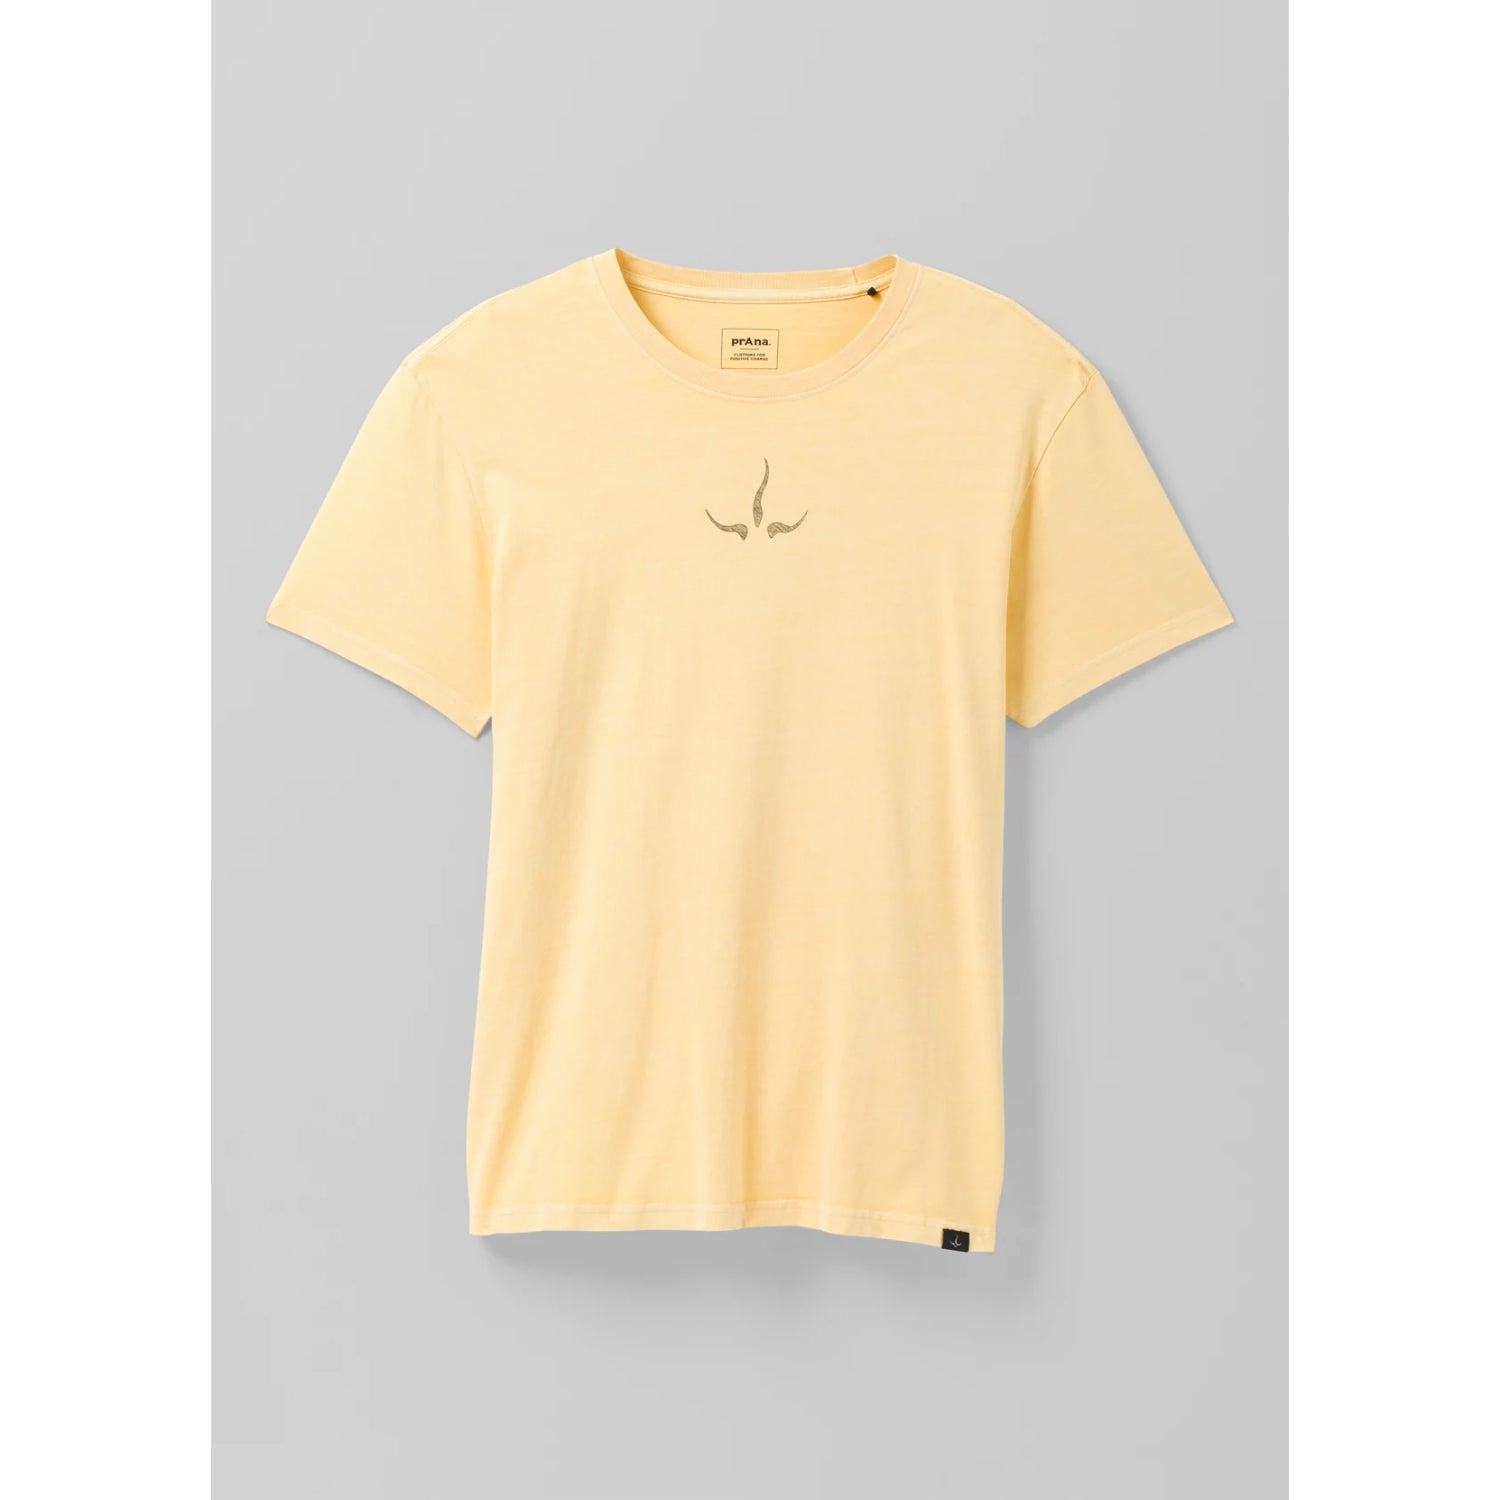 Prana Heritage Graphic T-Shirt in washed sun colour